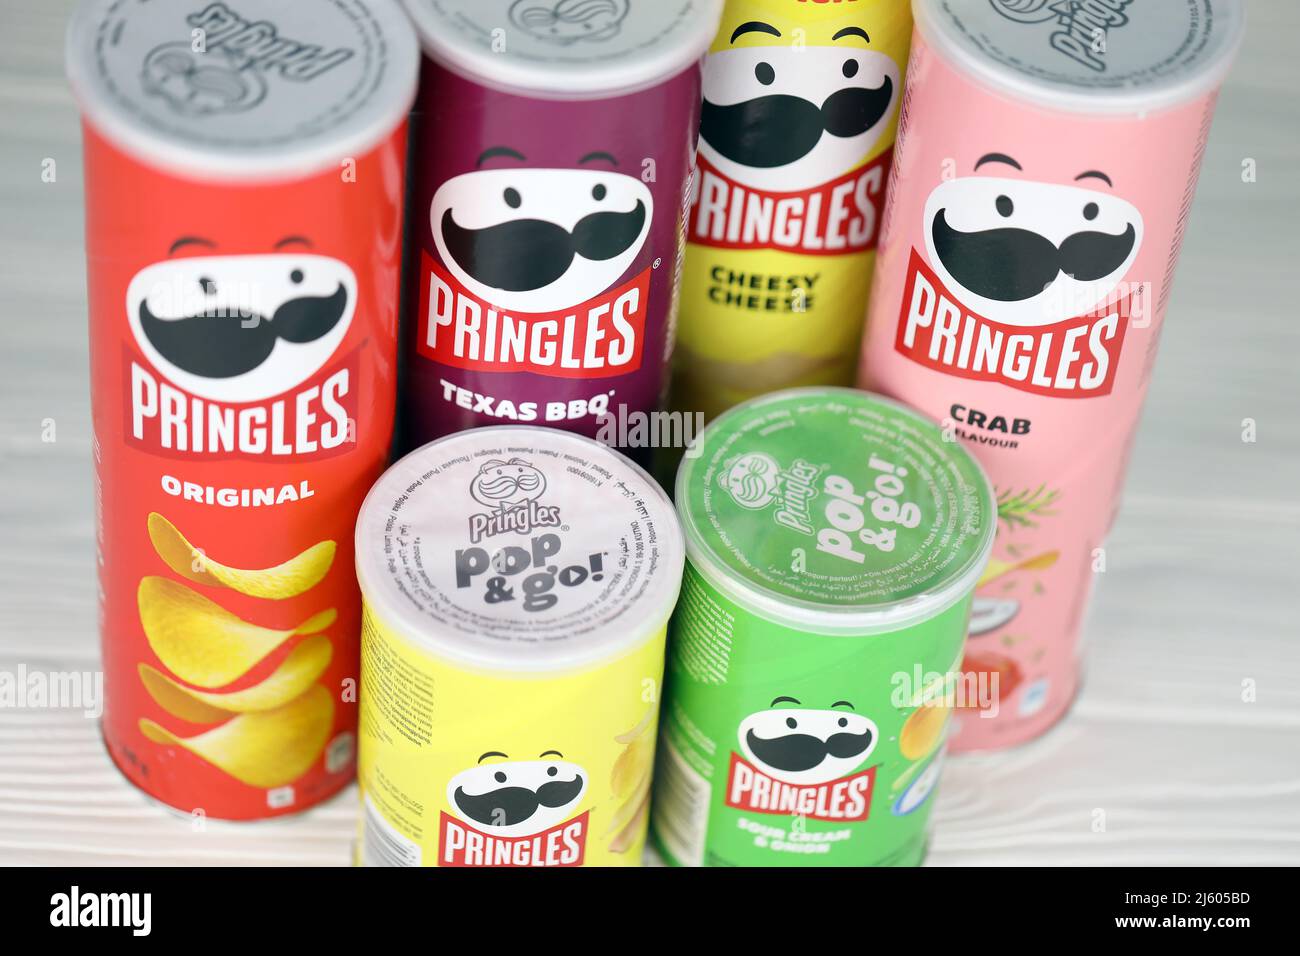 KHARKIV, UKRAINE - DECEMBER 16, 2021: Pringles production with new logo. Pringles is a brand of potato snack chips owned by the Kellogg Company Stock Photo